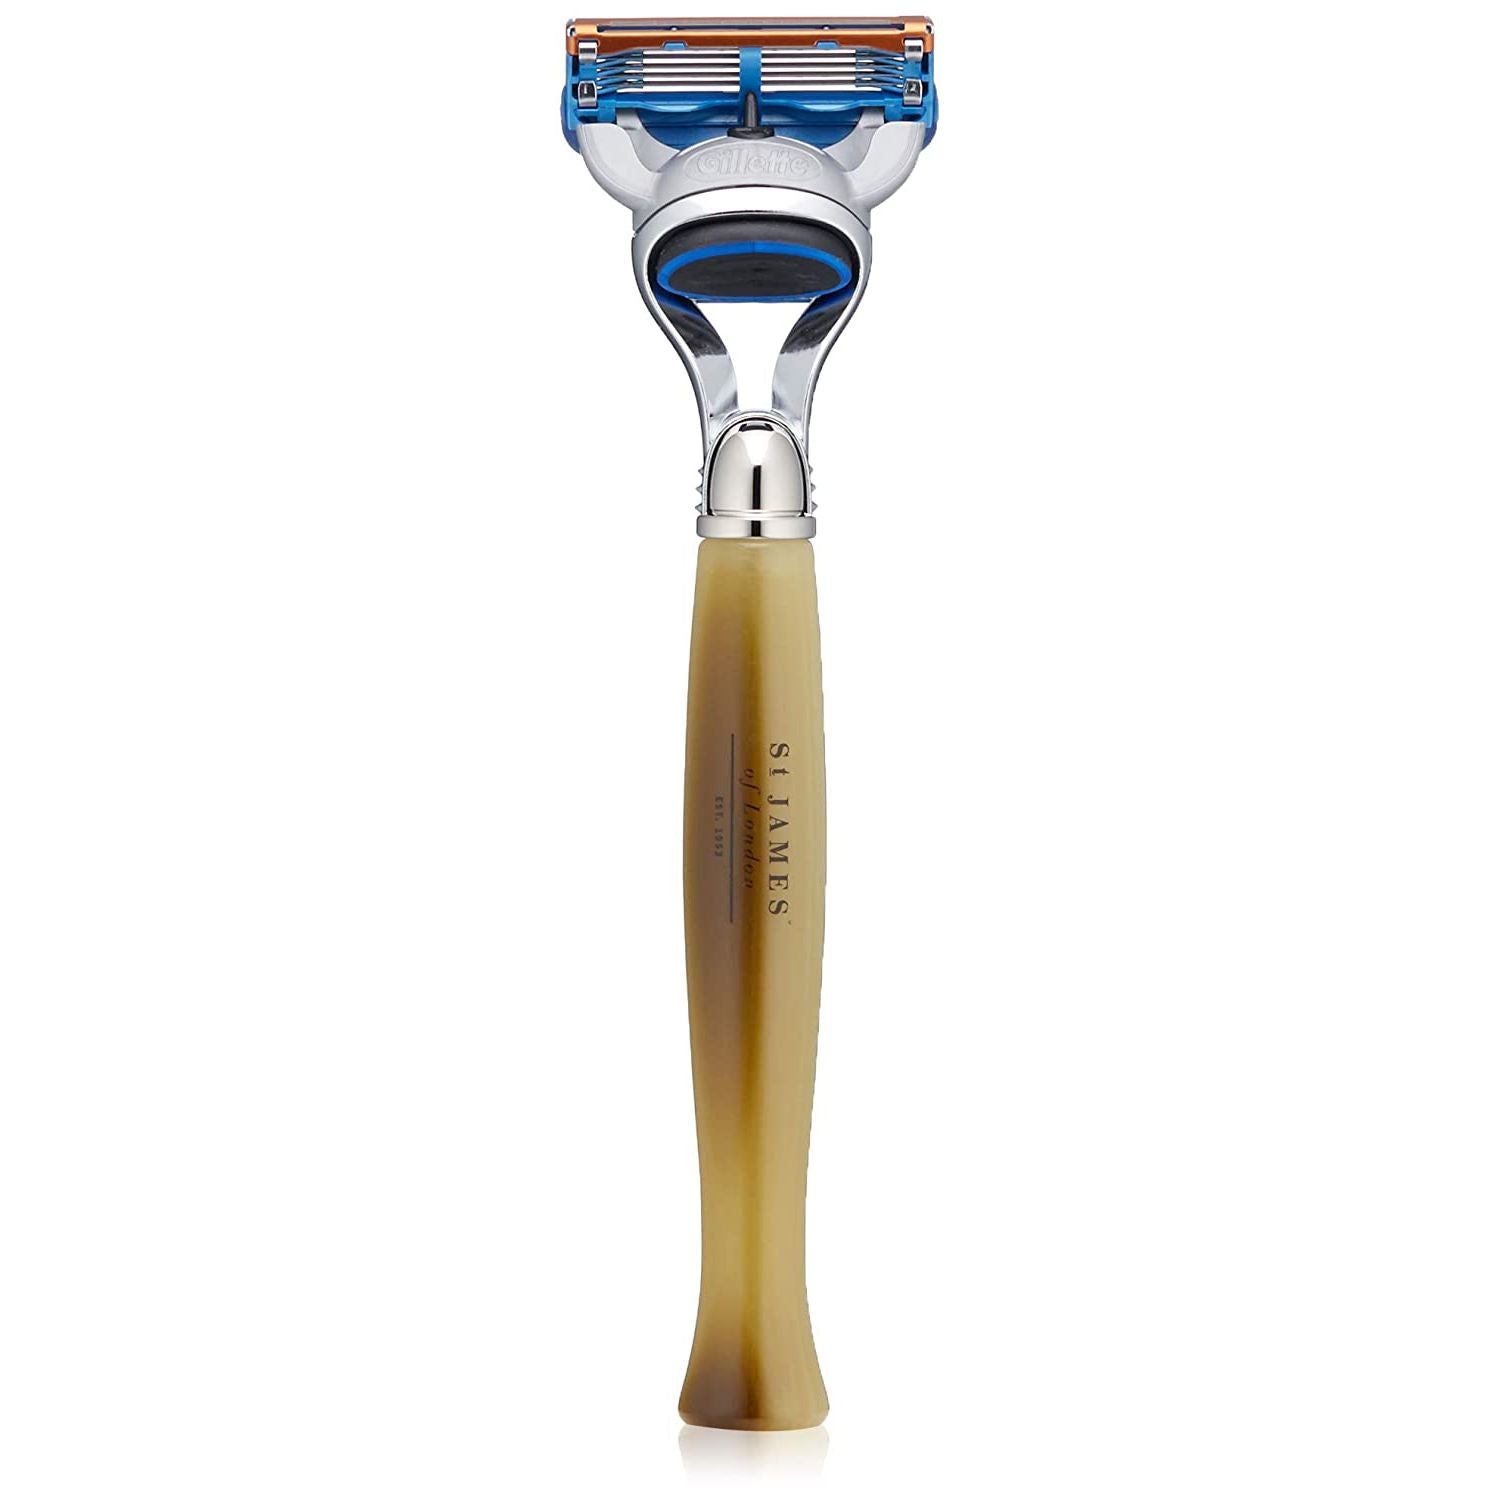 "Cheeky B'stard" Handcrafted 'Fusion' Razor in Horn by St. James of London